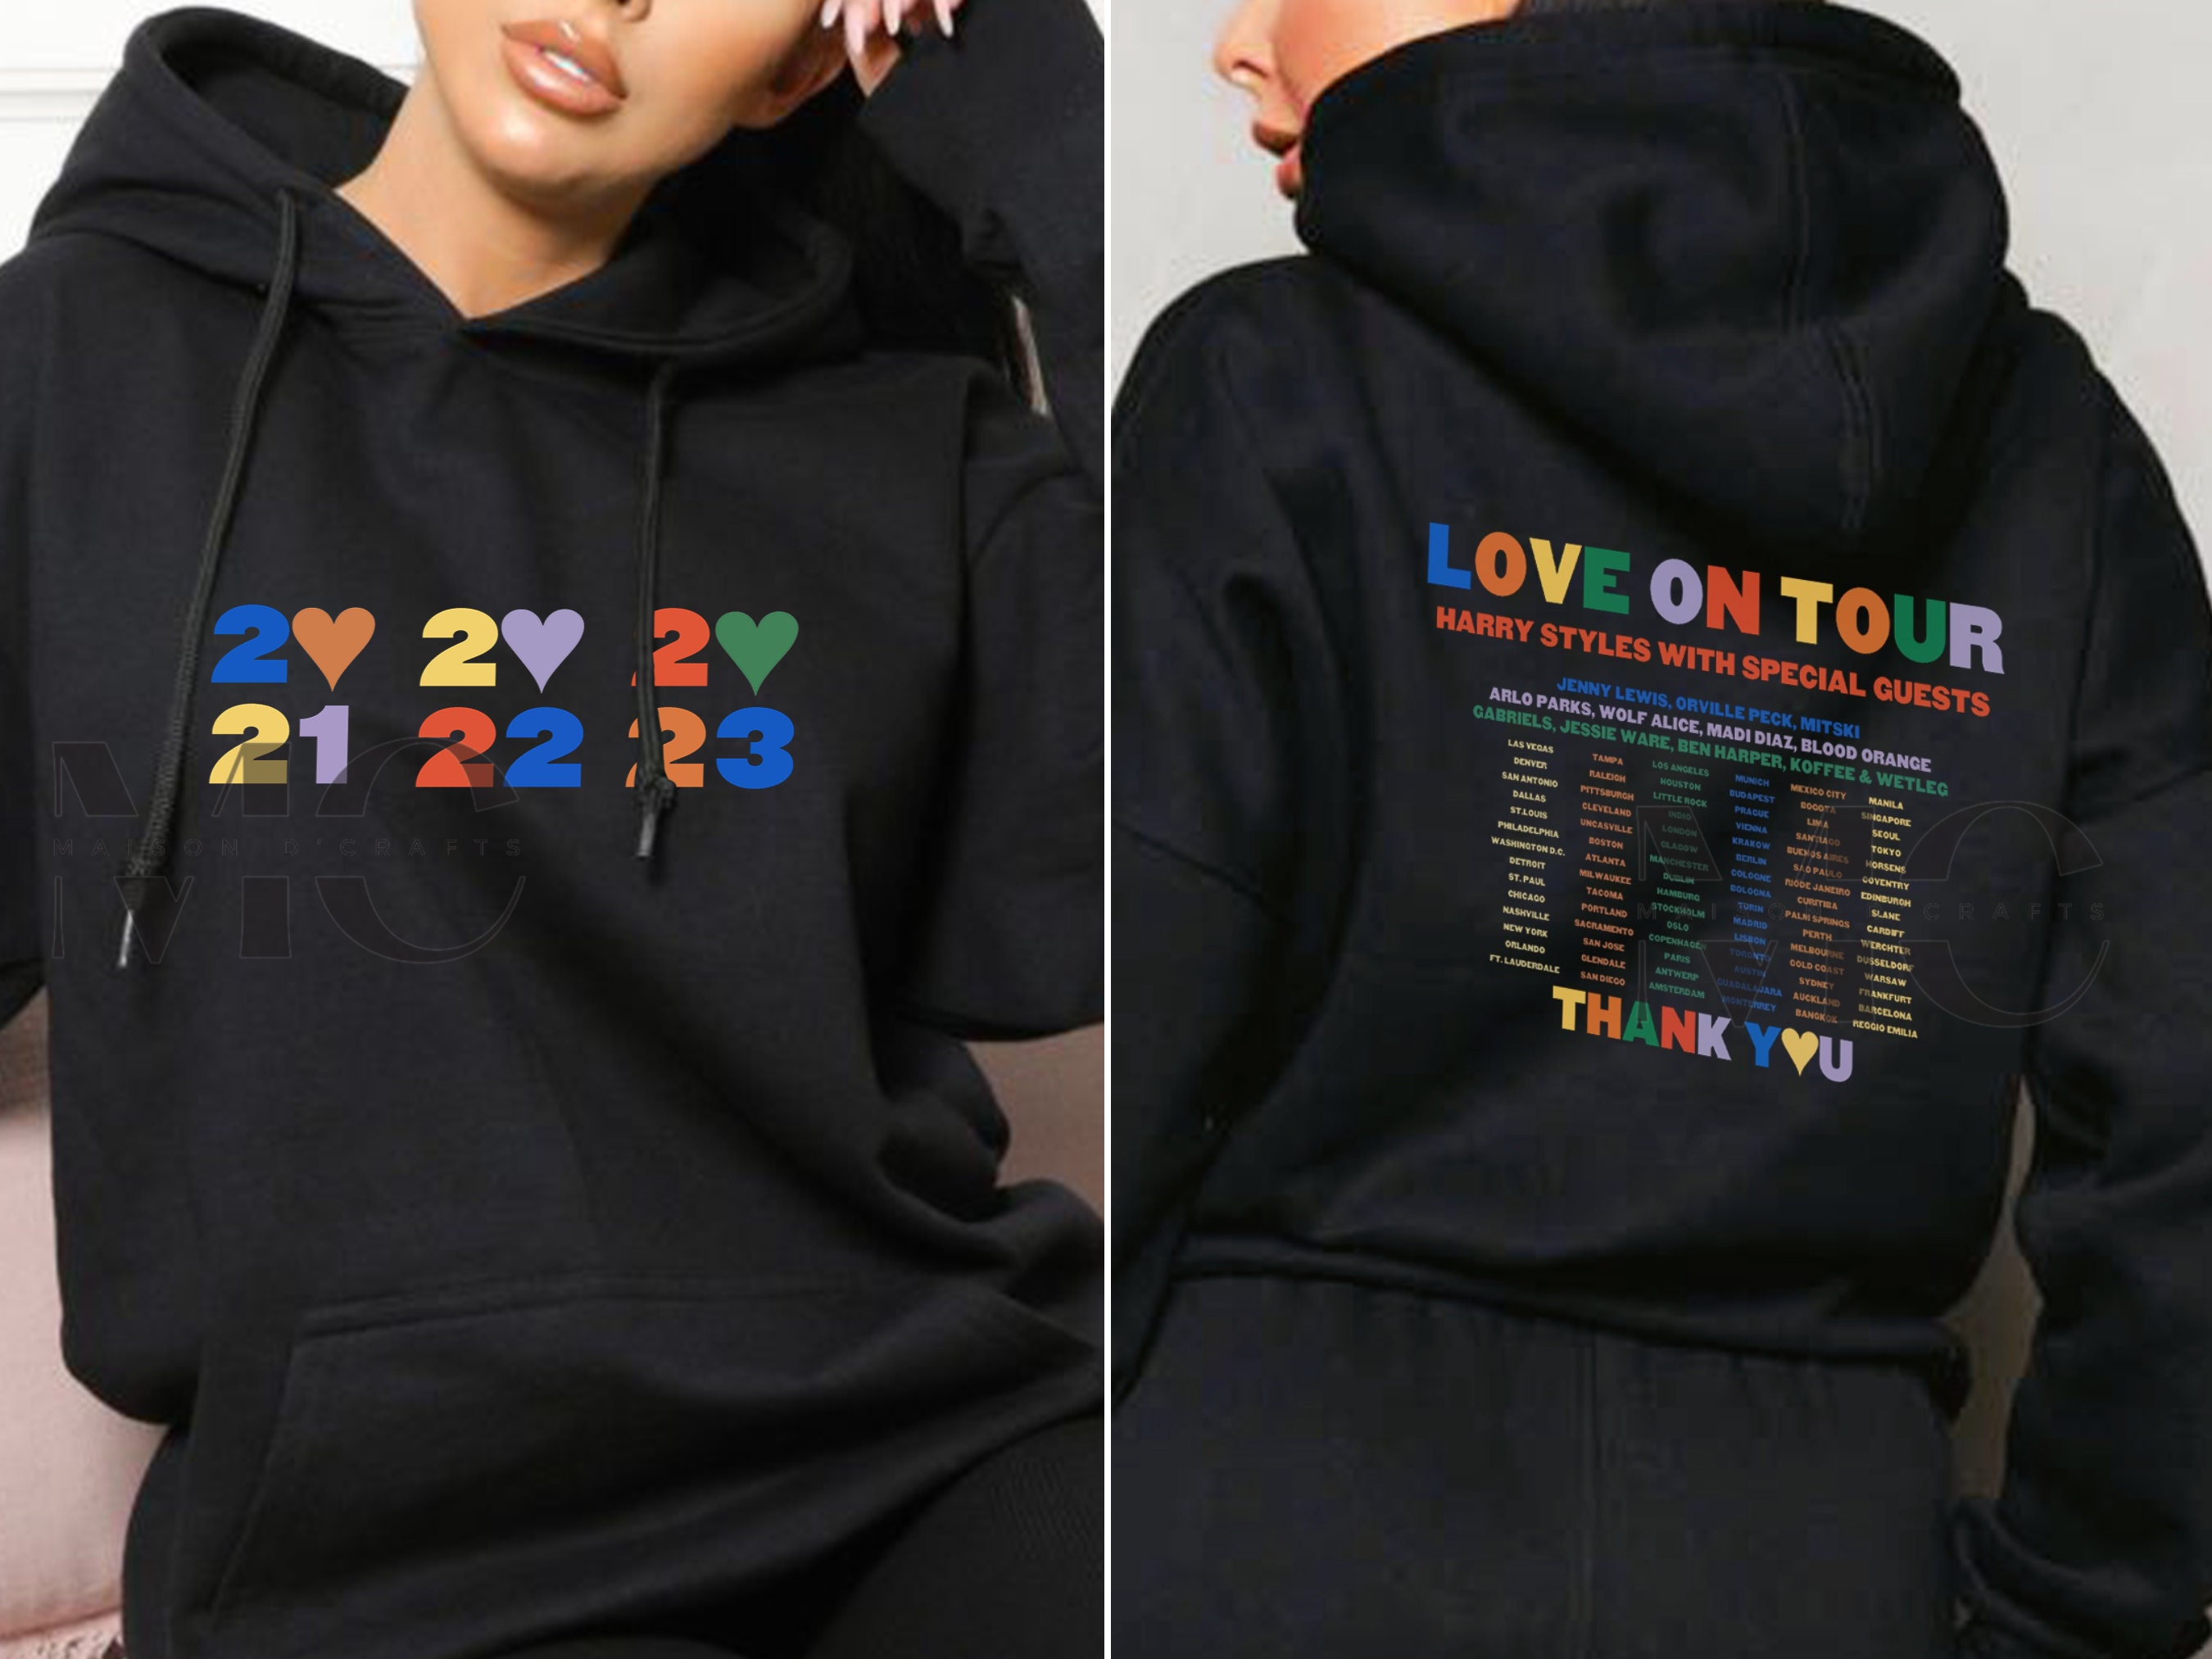 Harry Styles Love on Tour Hoodie Harry Styles Merch Thank You Hoodie HSLOT Harry  Styles Gifts Love on Tour Merch Harry Styles Fan Hoodie -  Denmark